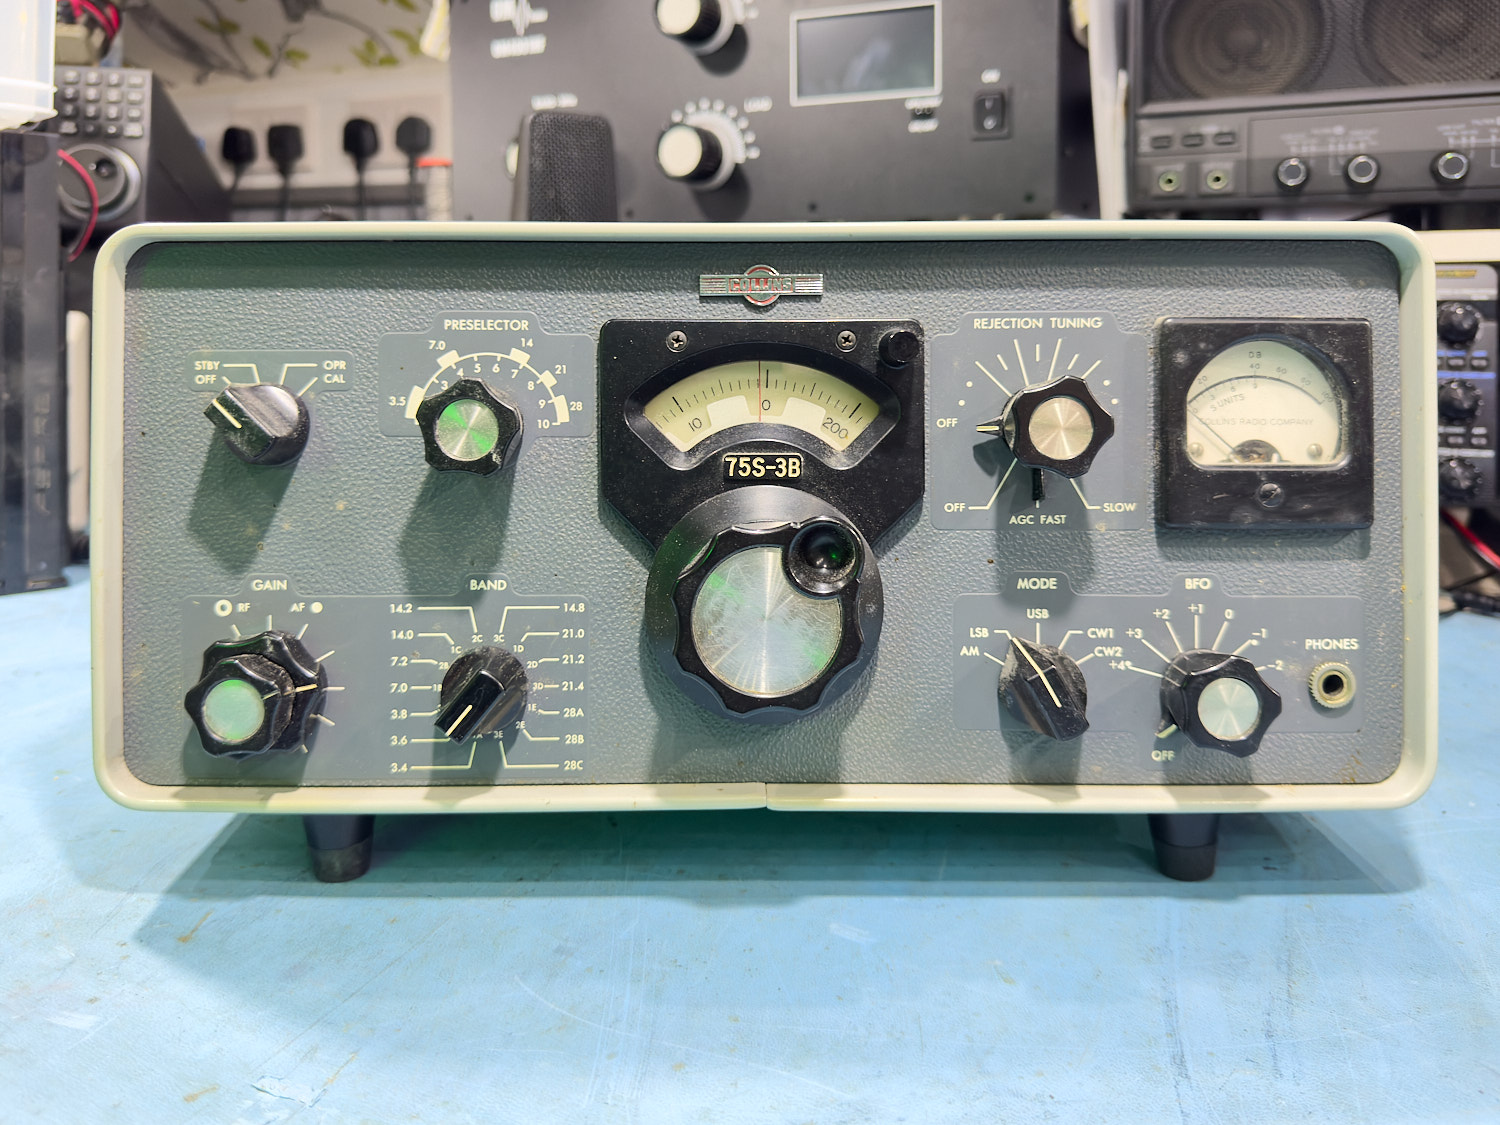 The Collins 75S-3B HF Receiver